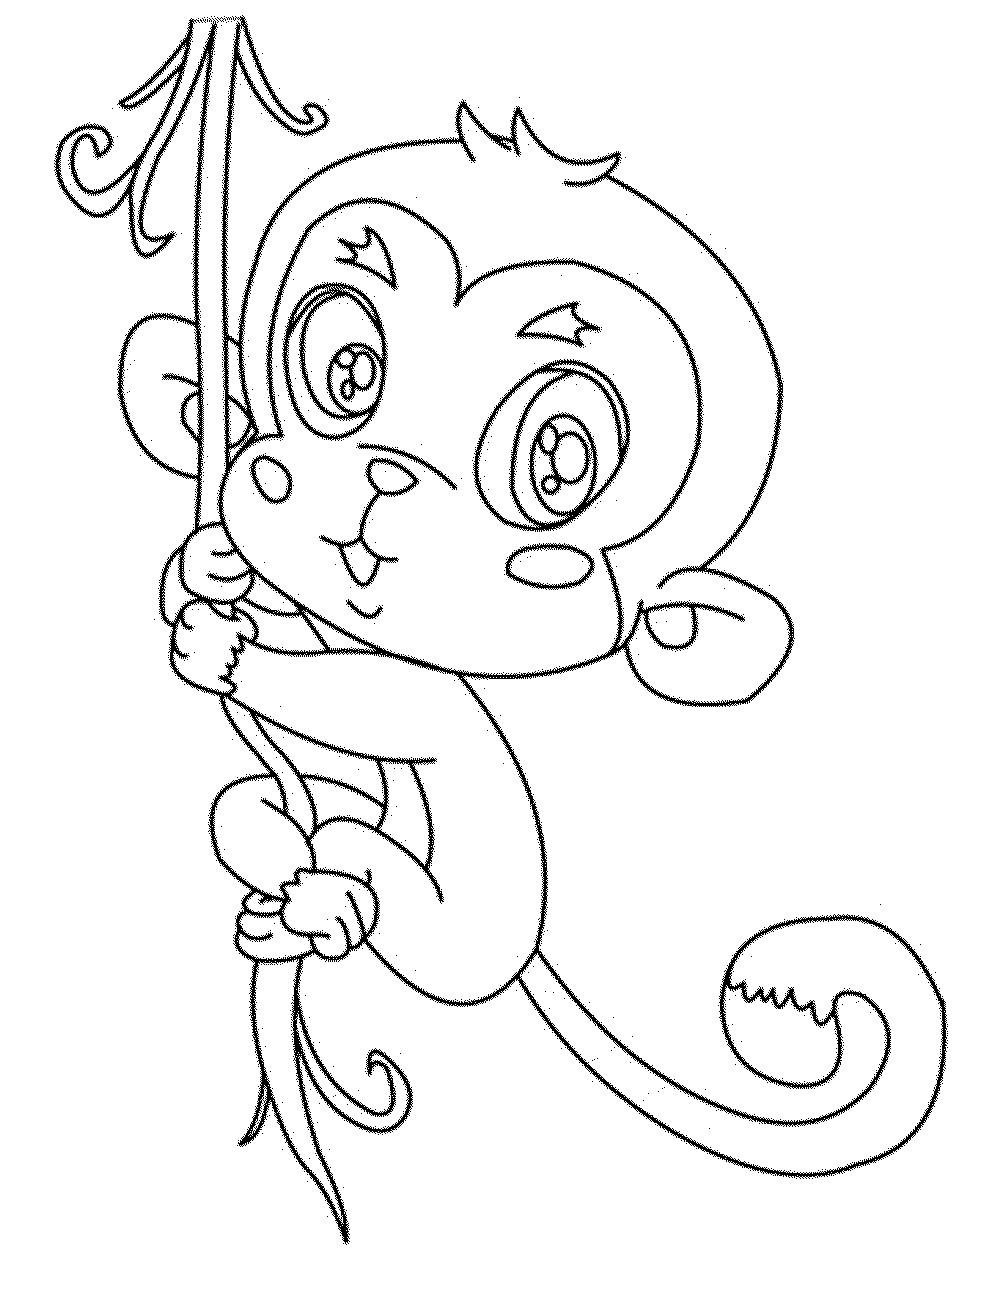 Monkey Head Coloring Page at GetColorings.com | Free ...